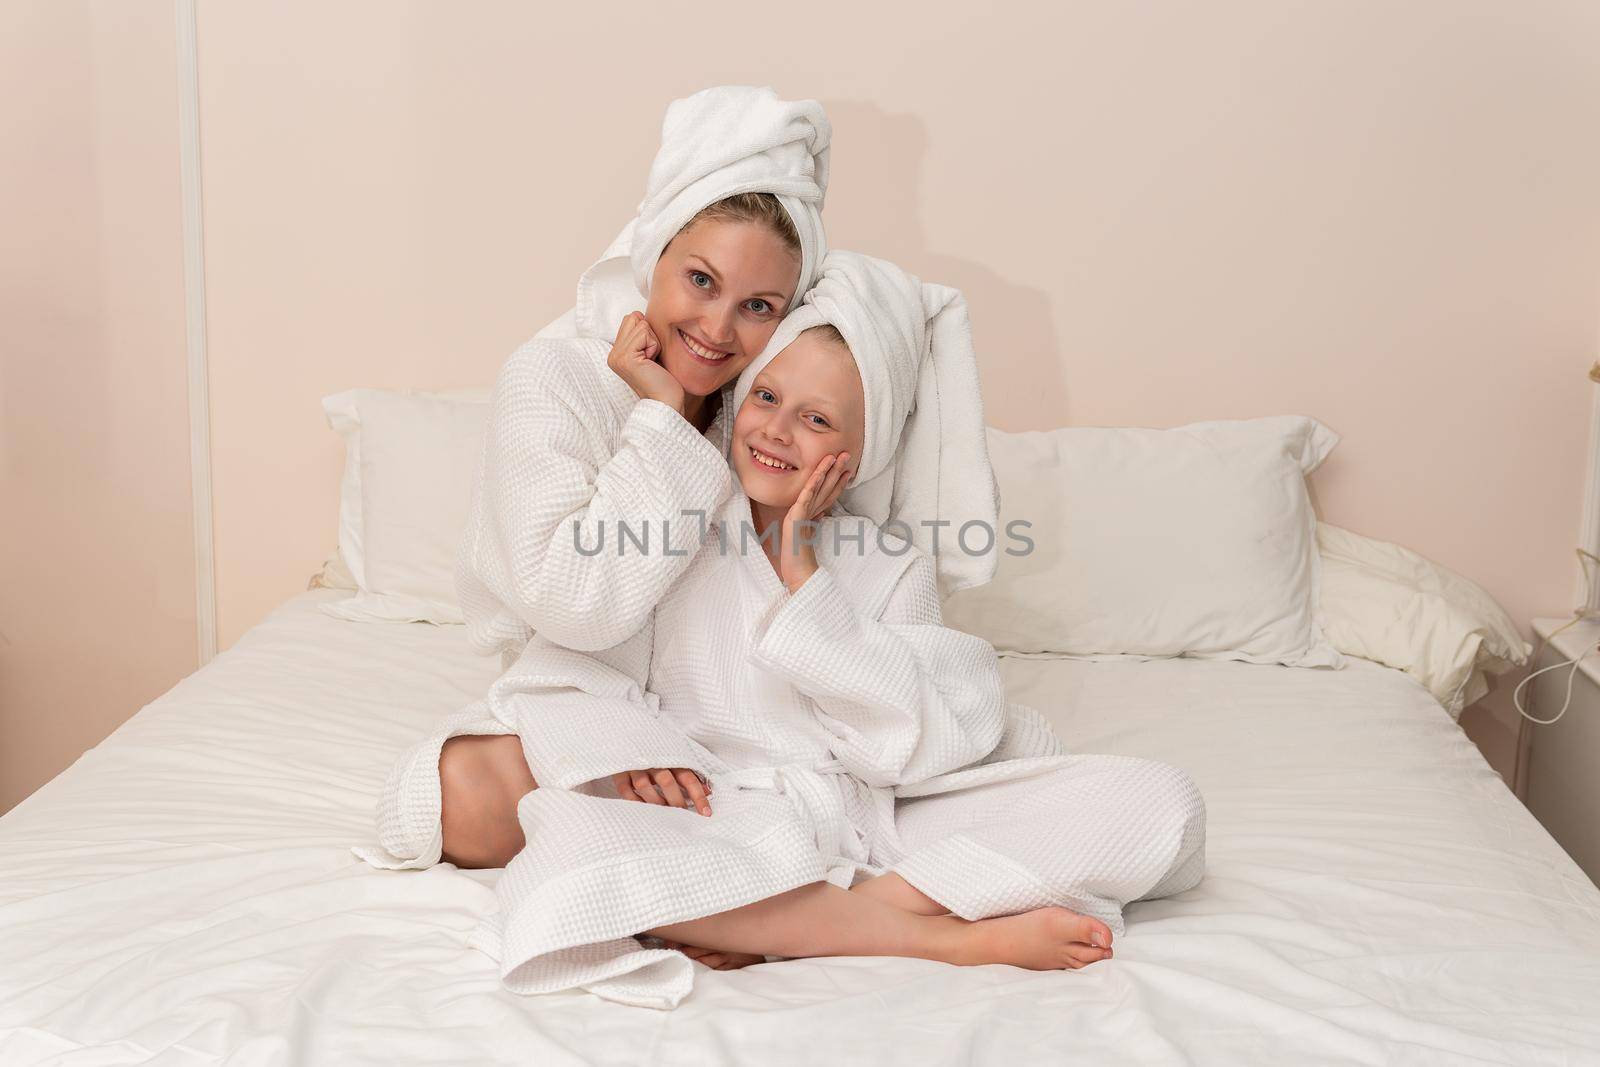 Daughter smiling love mom bath dries thinks elbows smile bathrobe, concept girl cute from lifestyle and hotel beauty, little bathing. Hair funny fashion,